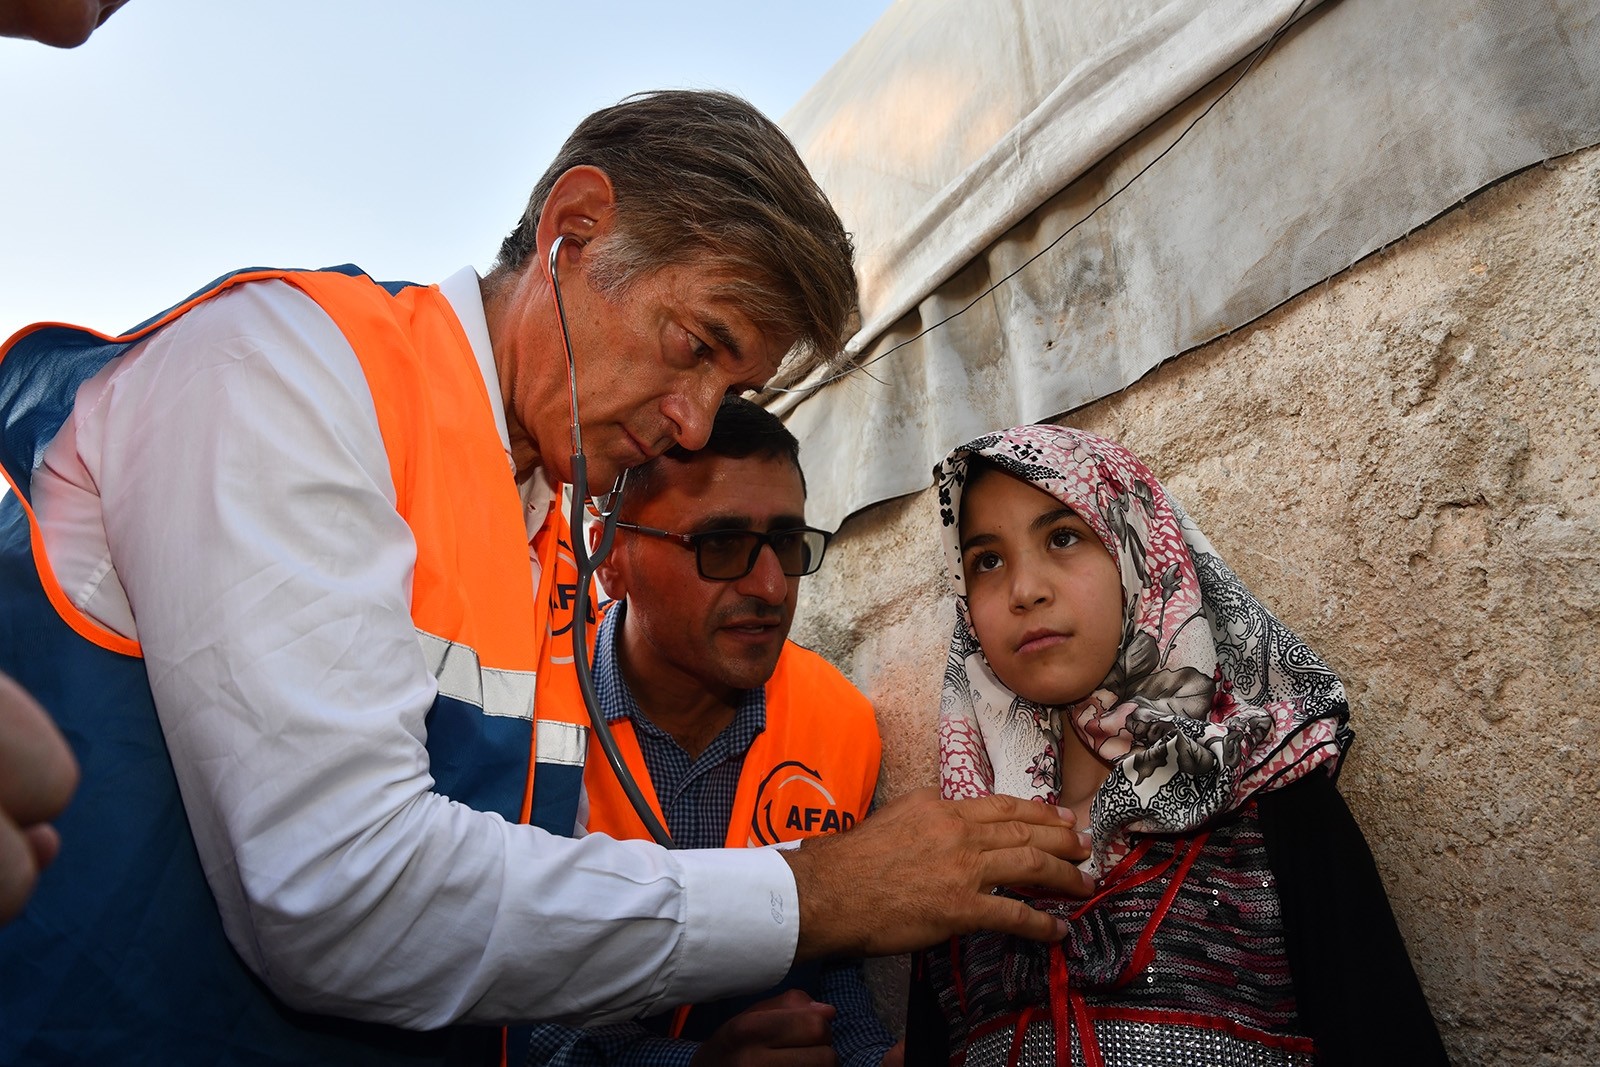 Dr. Öz gives medical assistance to Syrian children during visit to Azaz